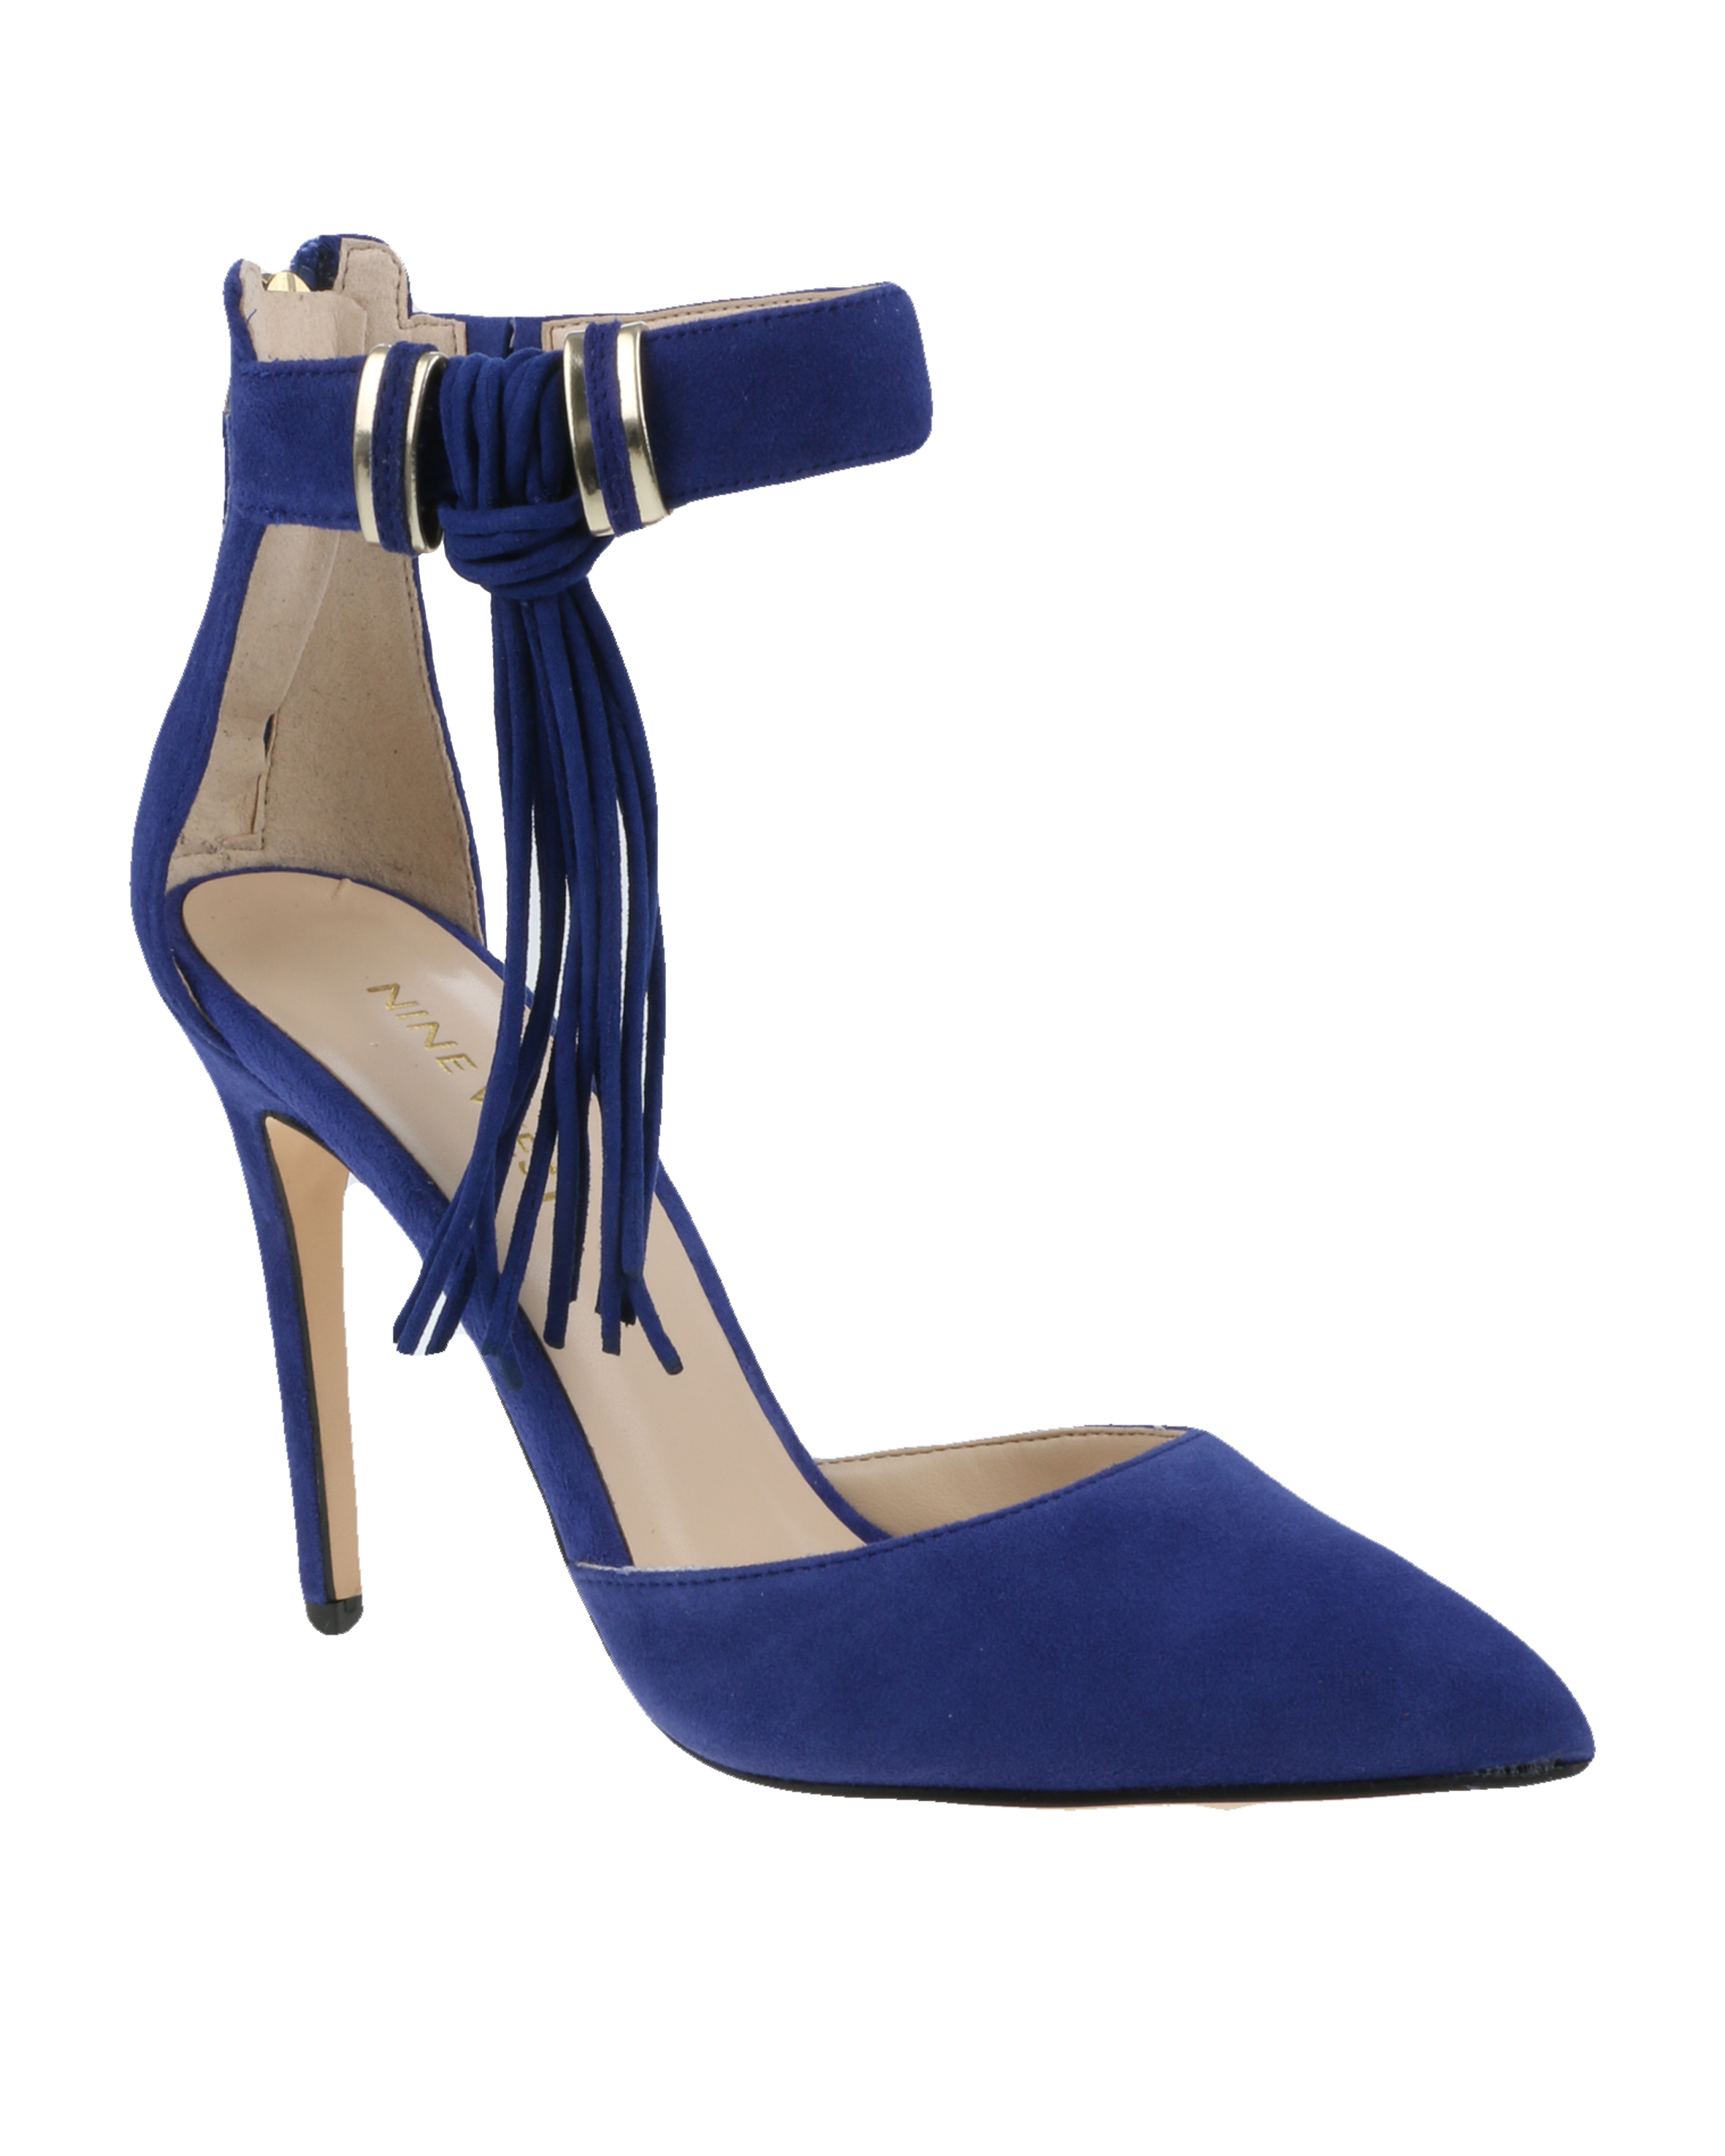 Nine West is now available on Zando! {PRESS RELEASE}